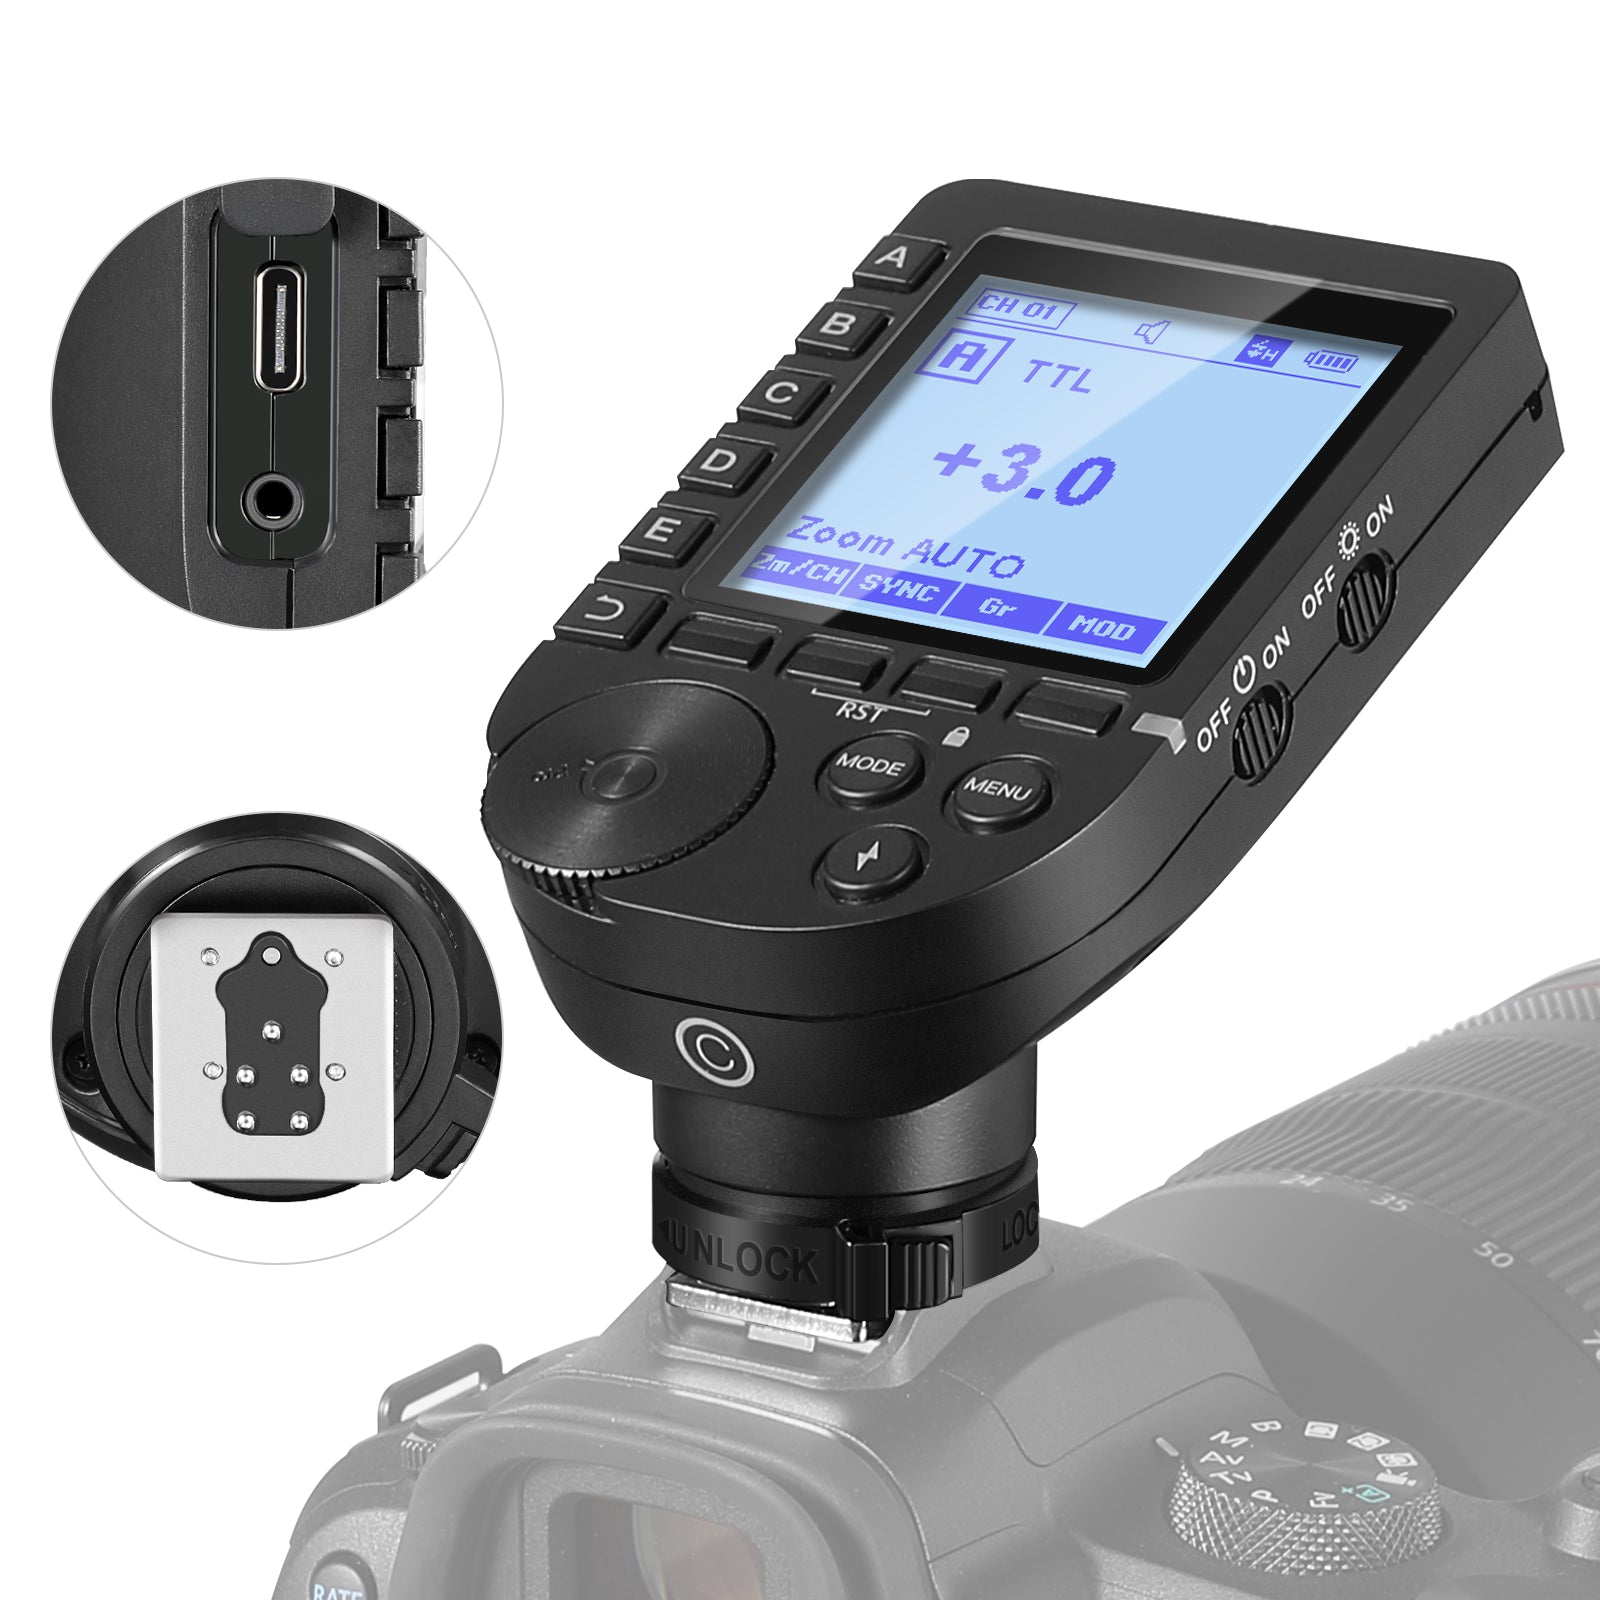 Godox Camera Flash Trigger Xpro-S for Sony Wireless Remote 2.4GHz 1/8000s  HSS TTL-Convert-Manual Large Screen Design Customizable Functions